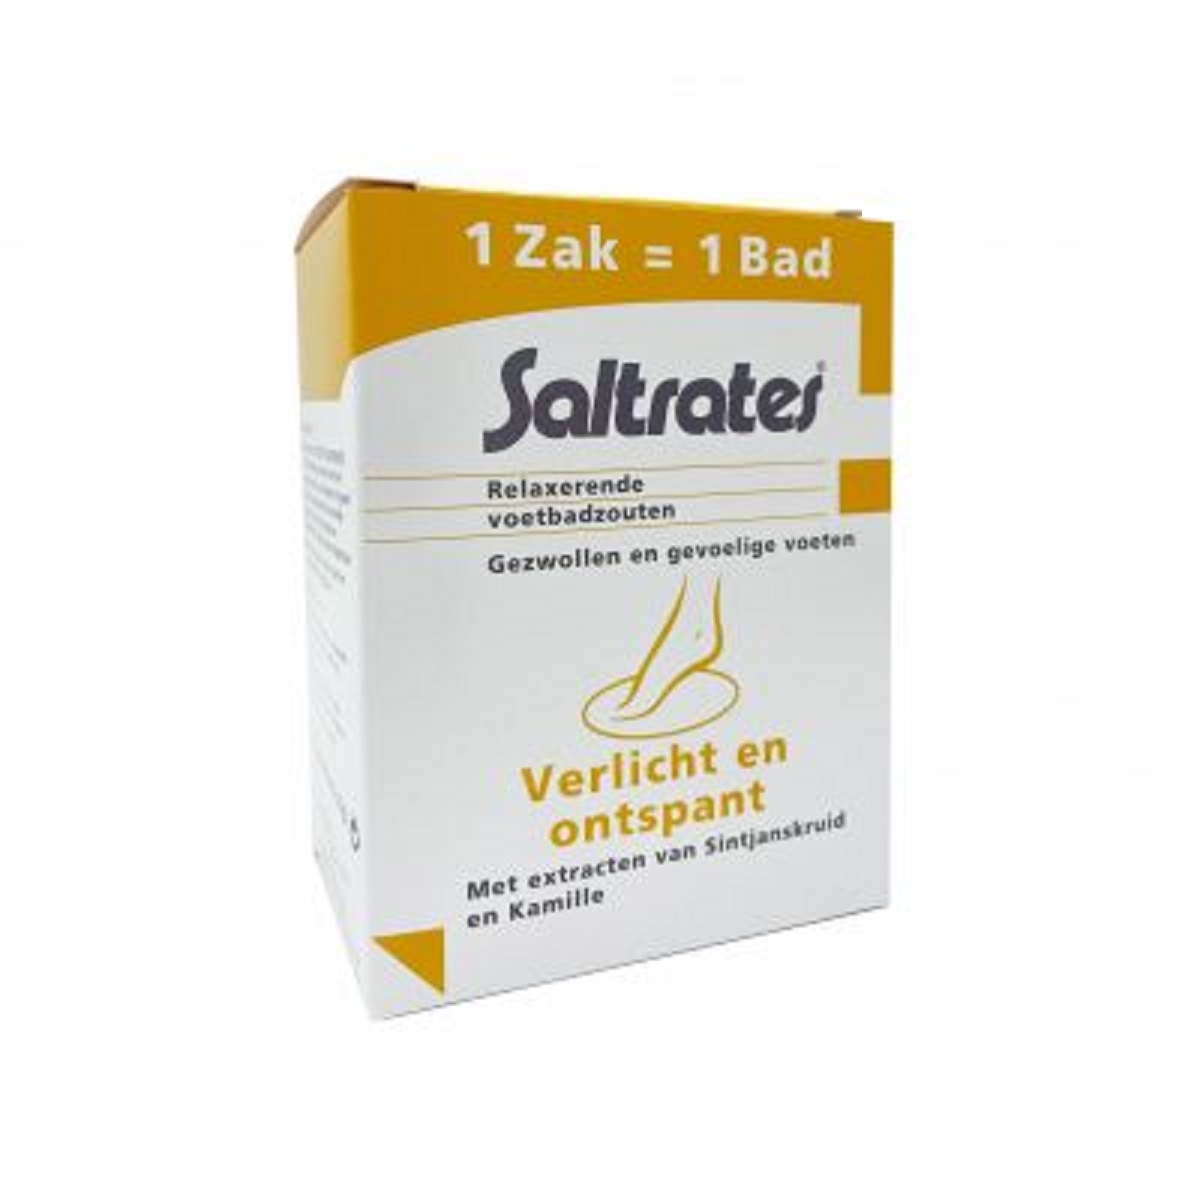 SALTRATEN ZOUT VOETBAD RELAX (10X20G)